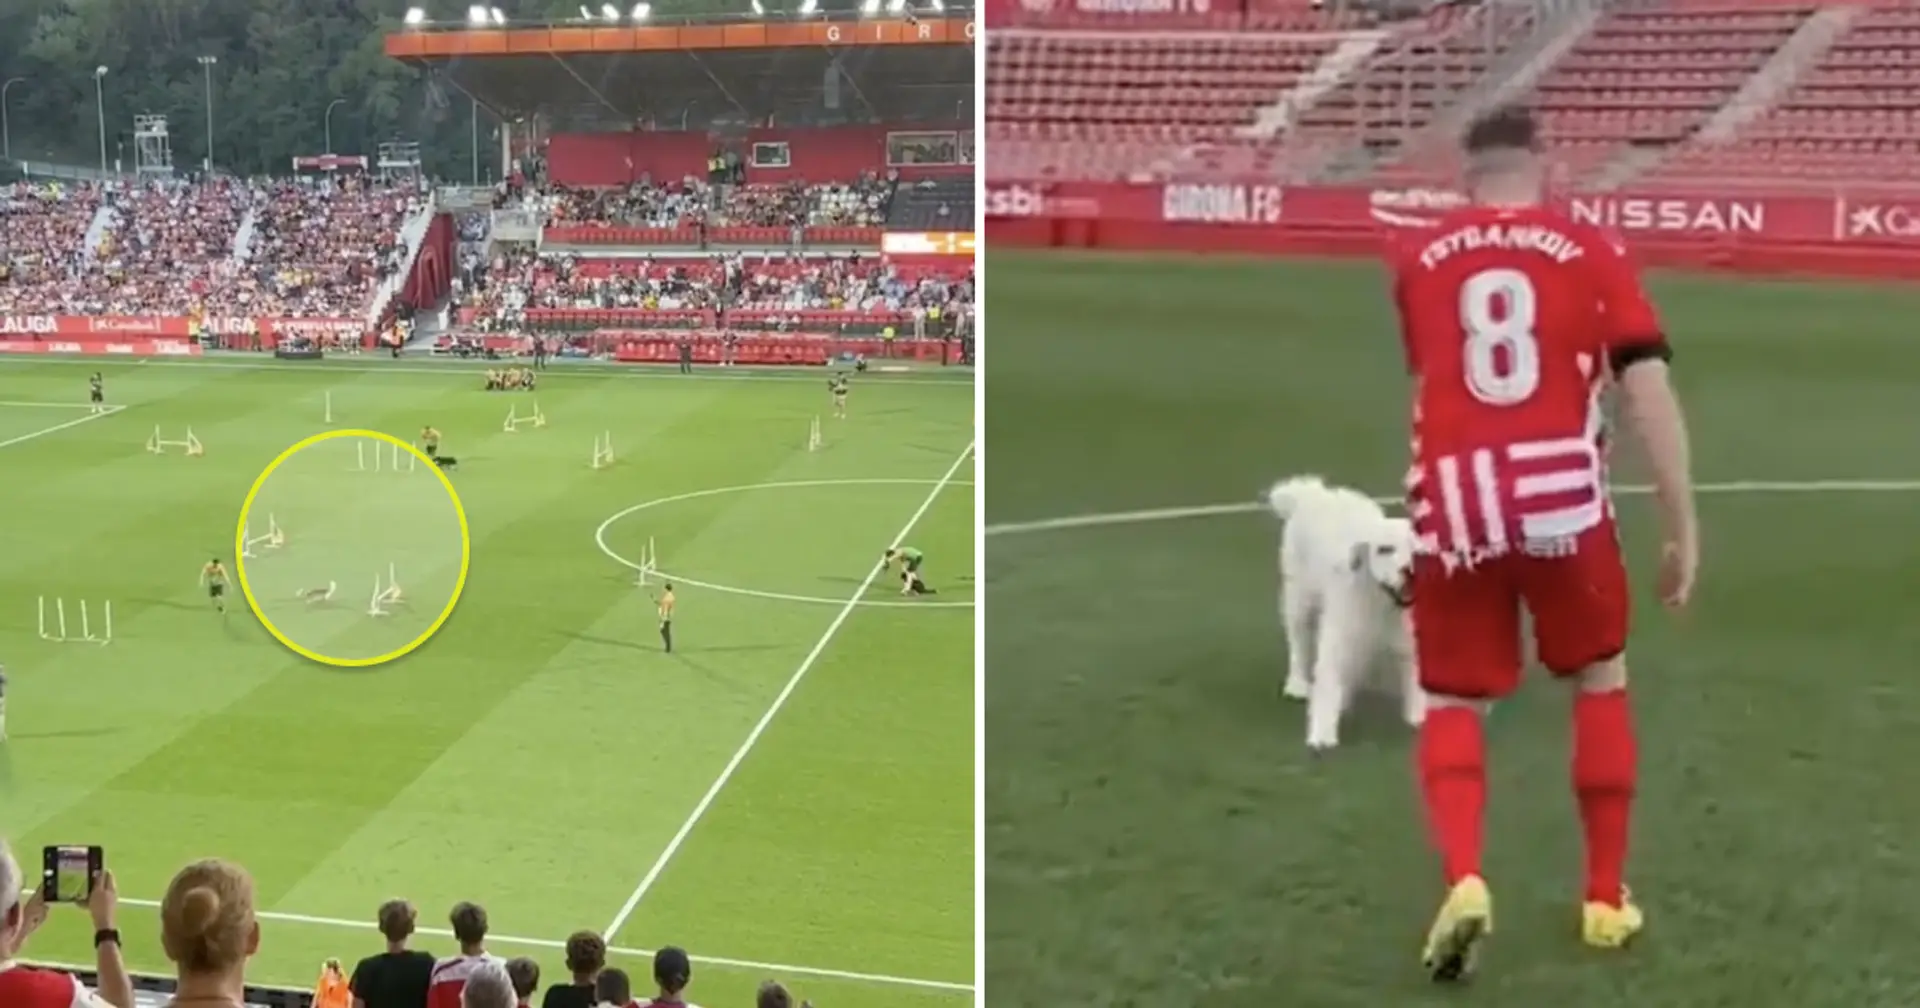 The cutest 'pitch invasion' spotted at Girona's stadium at halftime v Madrid